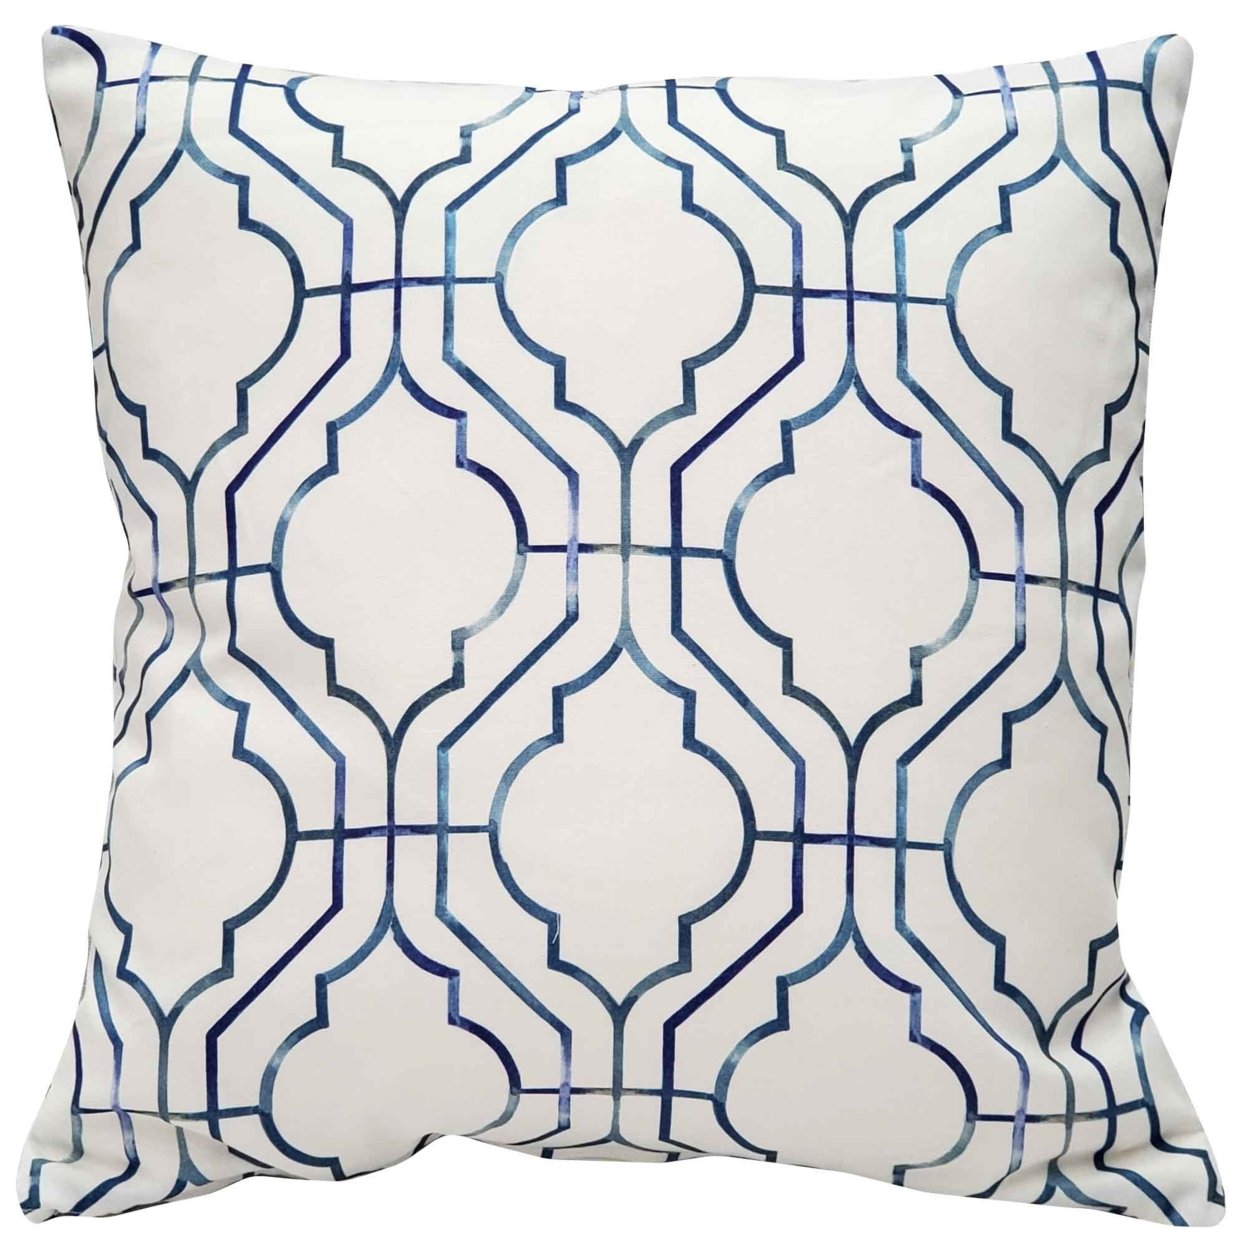 Biltmore Gate Blue Throw Pillow 20x20 Inches Square, Complete Pillow with Polyfill Pillow Insert